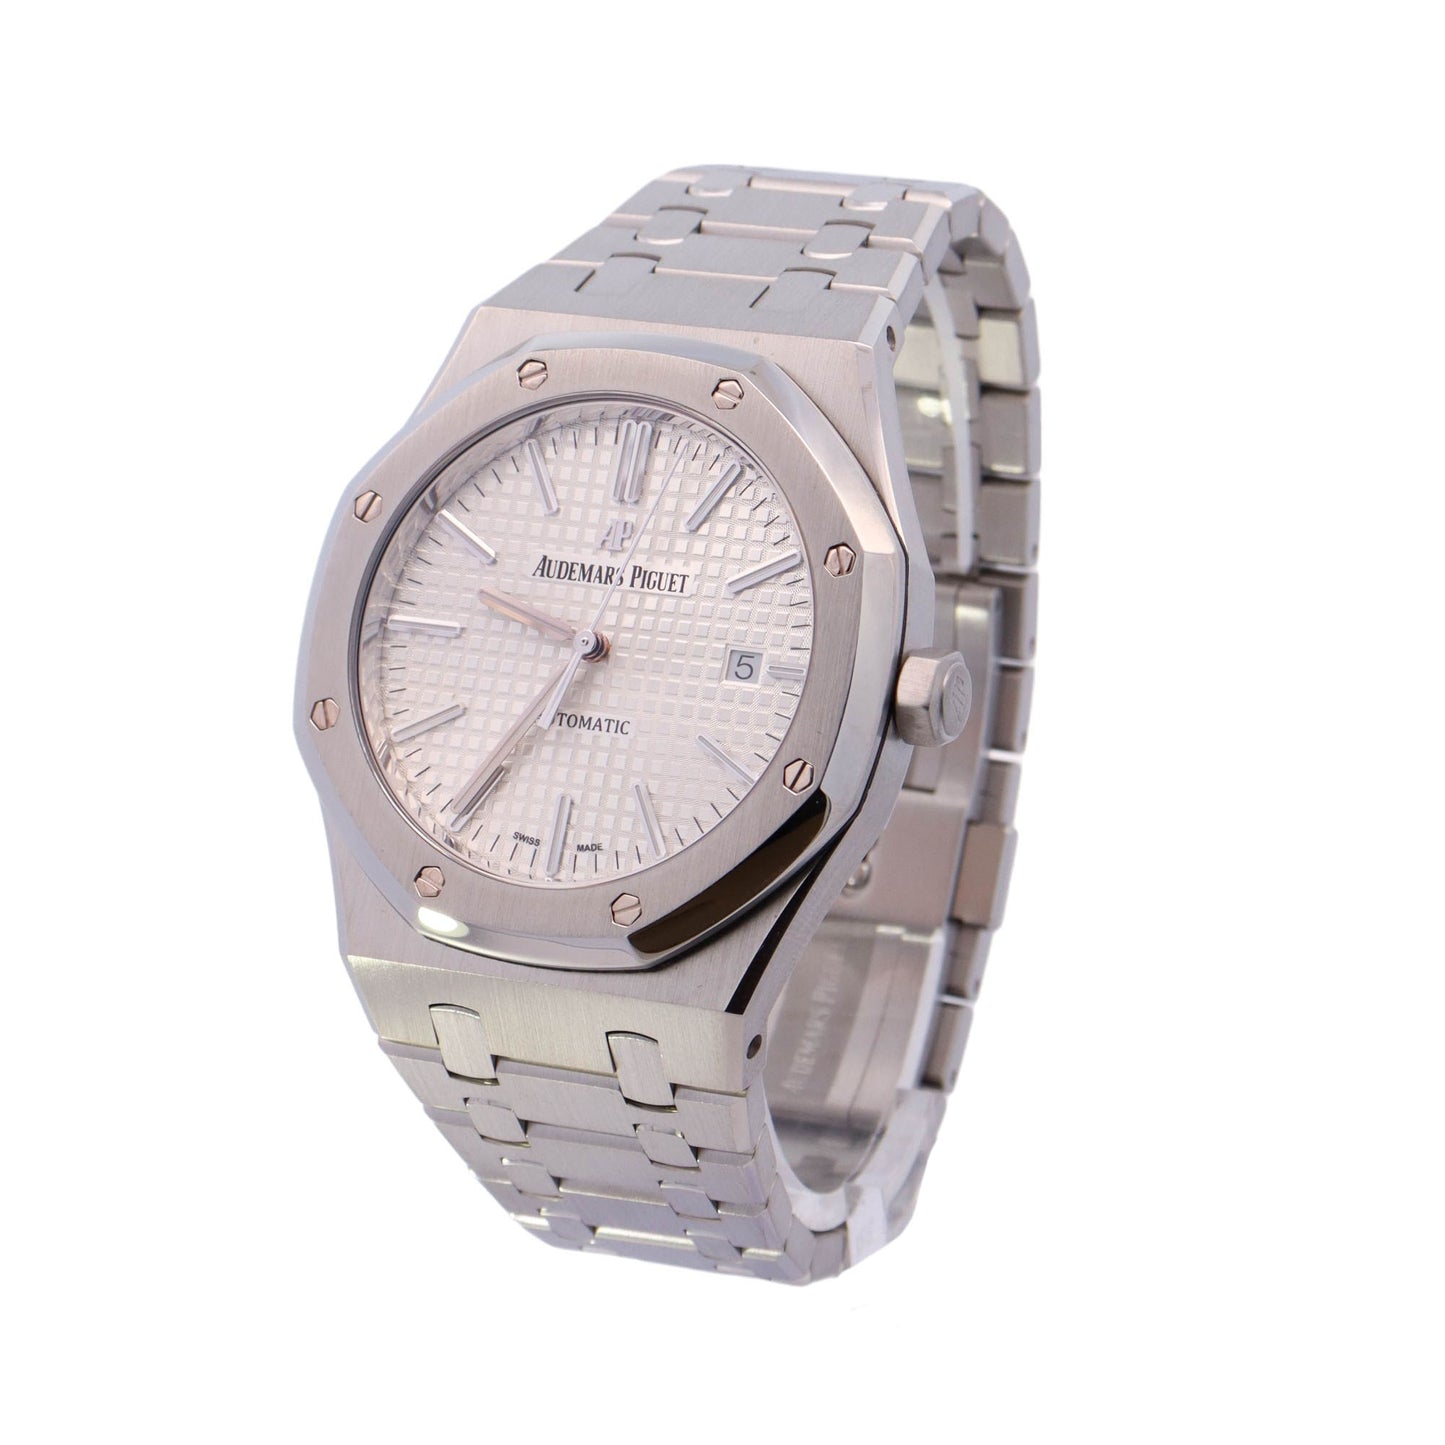 Audemars Piguet Men's Royal Oak Stainless Steel 41mm White "Grand Tappiserie" Stick Dial Watch Reference #: 15400ST.OO.1220ST.02 - Happy Jewelers Fine Jewelry Lifetime Warranty